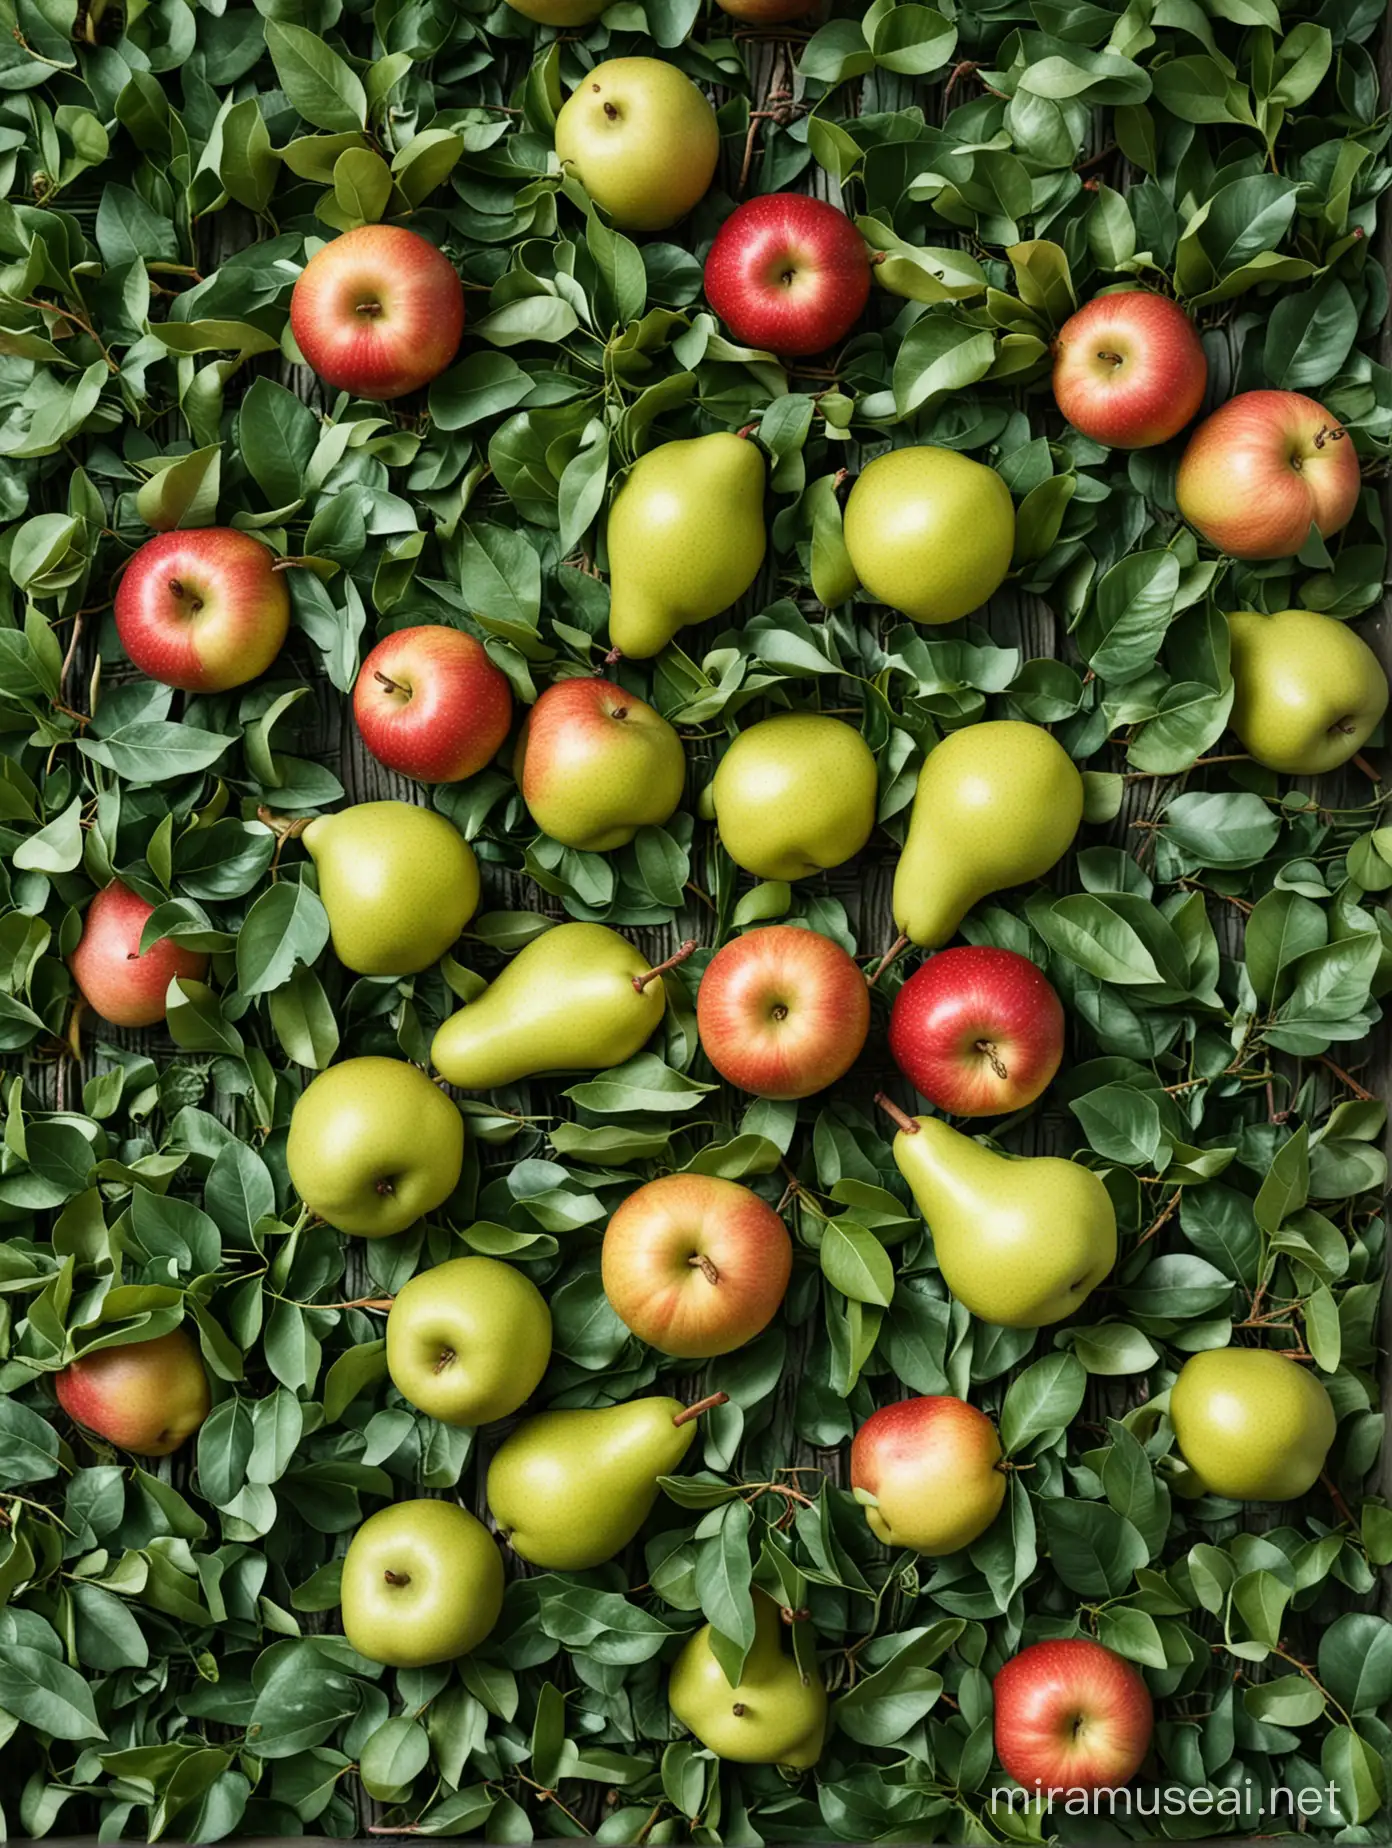 pears, apples, green leaves, photo